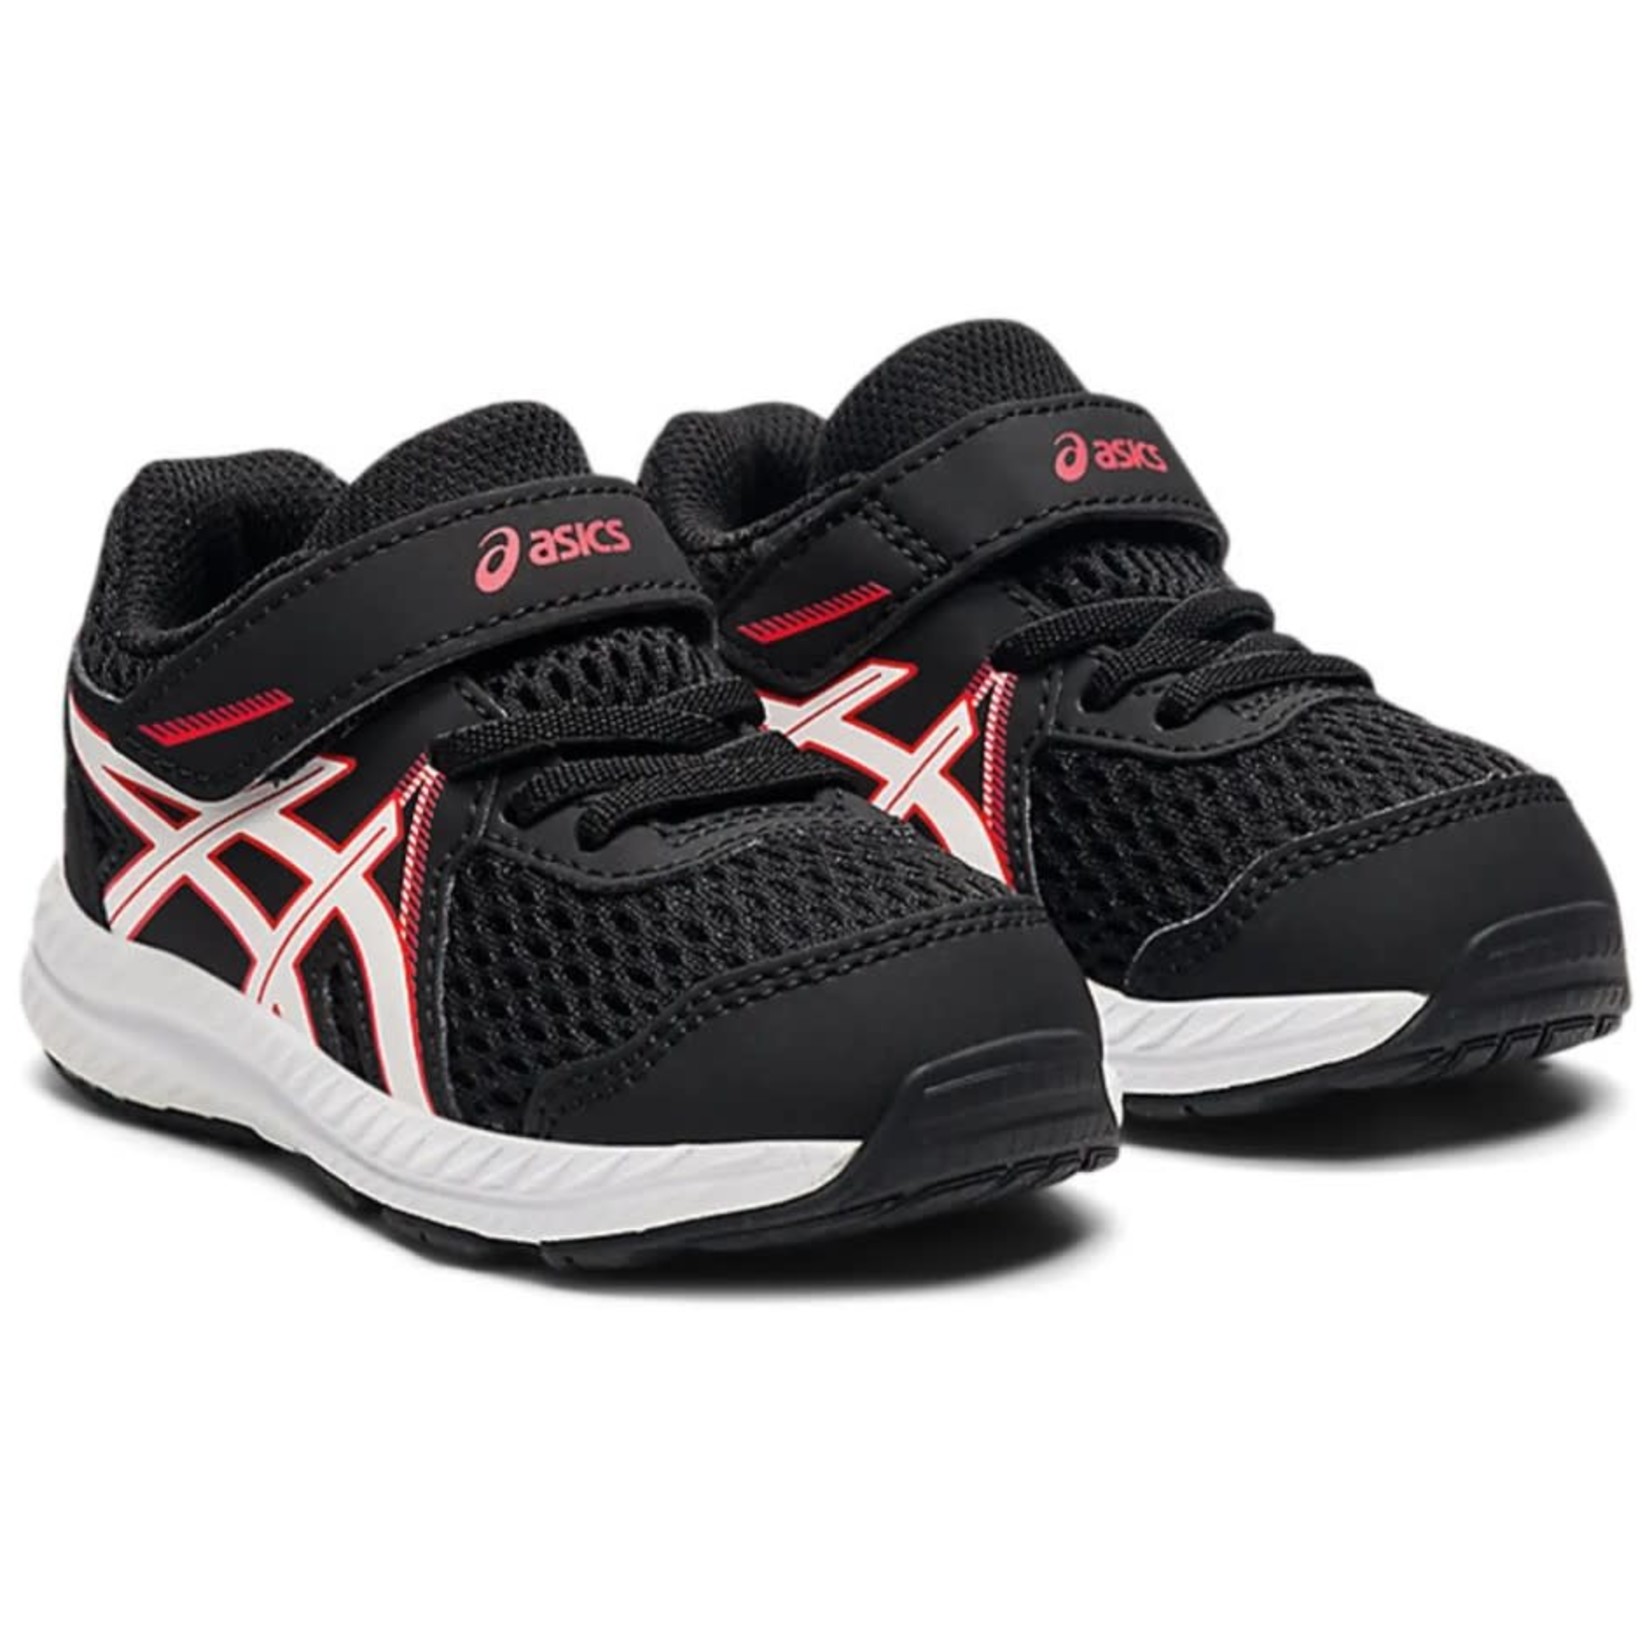 Asics ASICS - Chaussures de sport 'Contend 7 TS - Black/Electric red